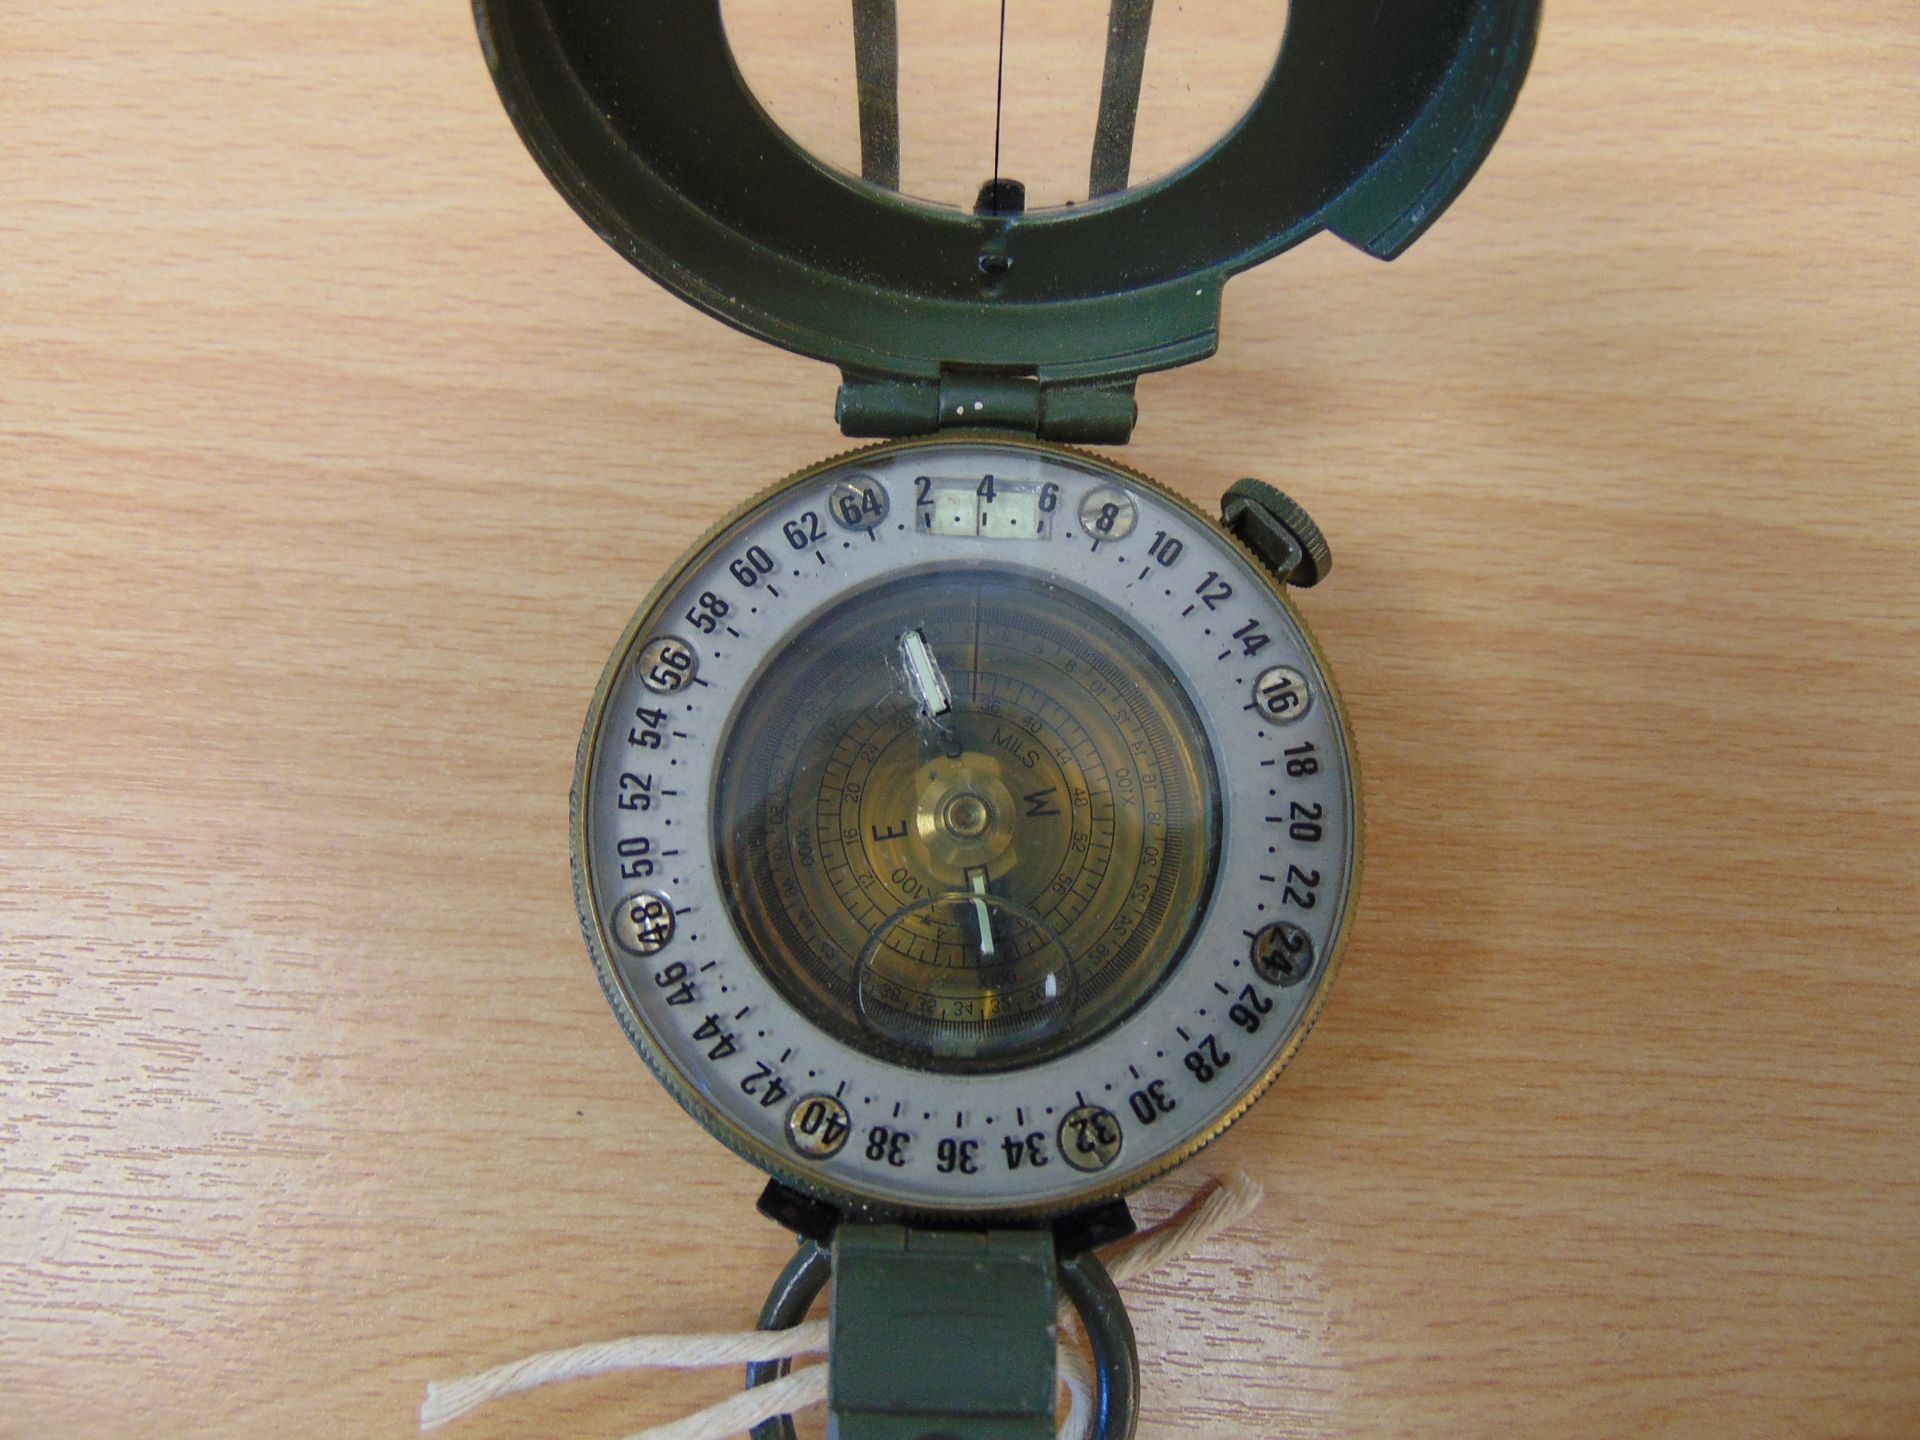 Stanley London British Army Prismatic Compass in mils, Nato marks - Image 2 of 4